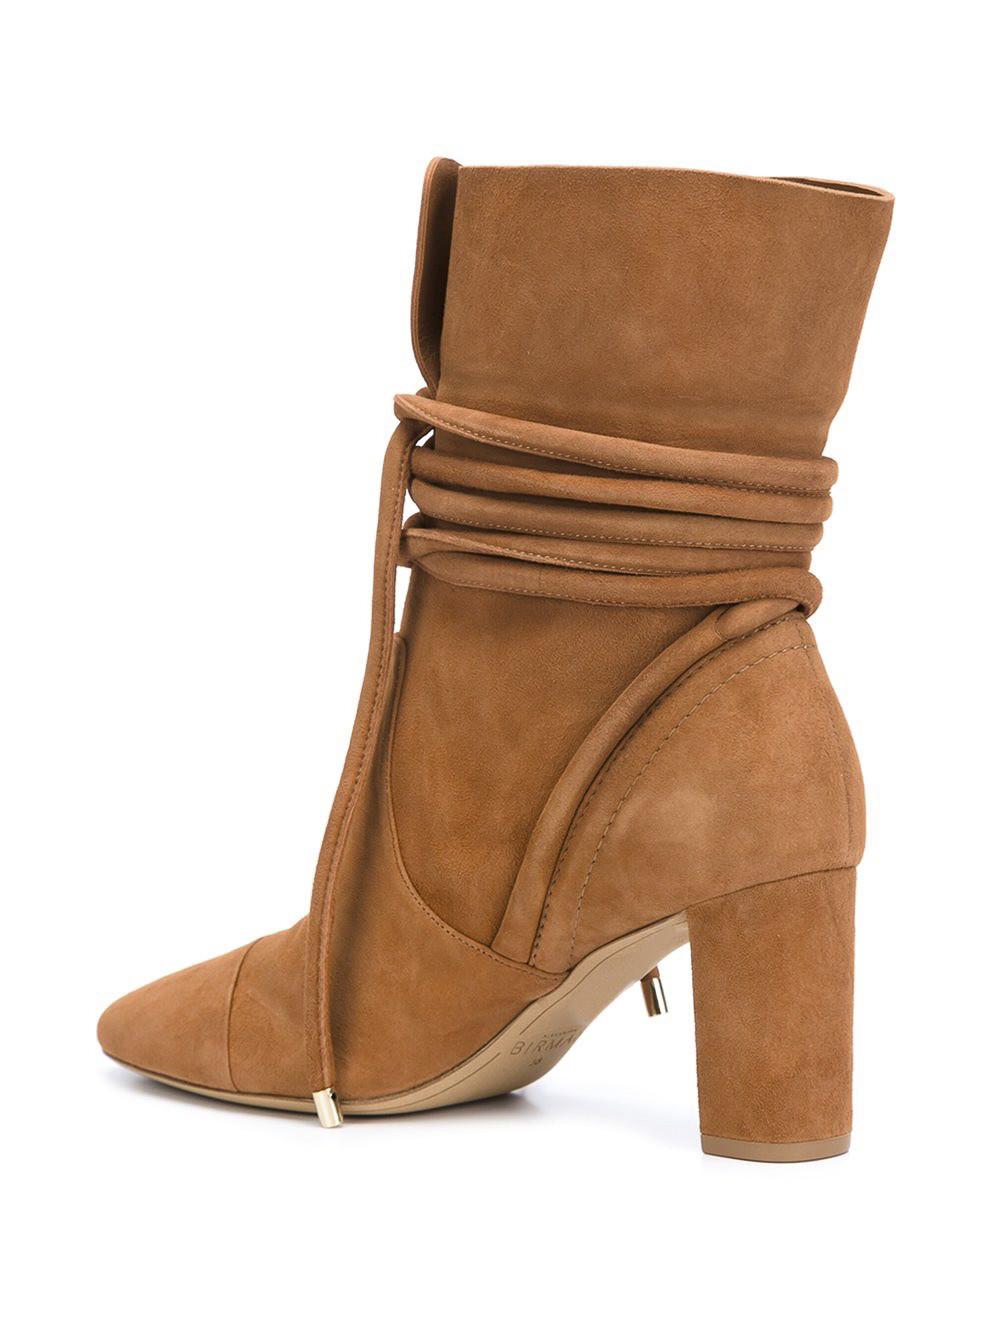 Alexandre Birman Leather 'betsy' Boots in Brown - Lyst